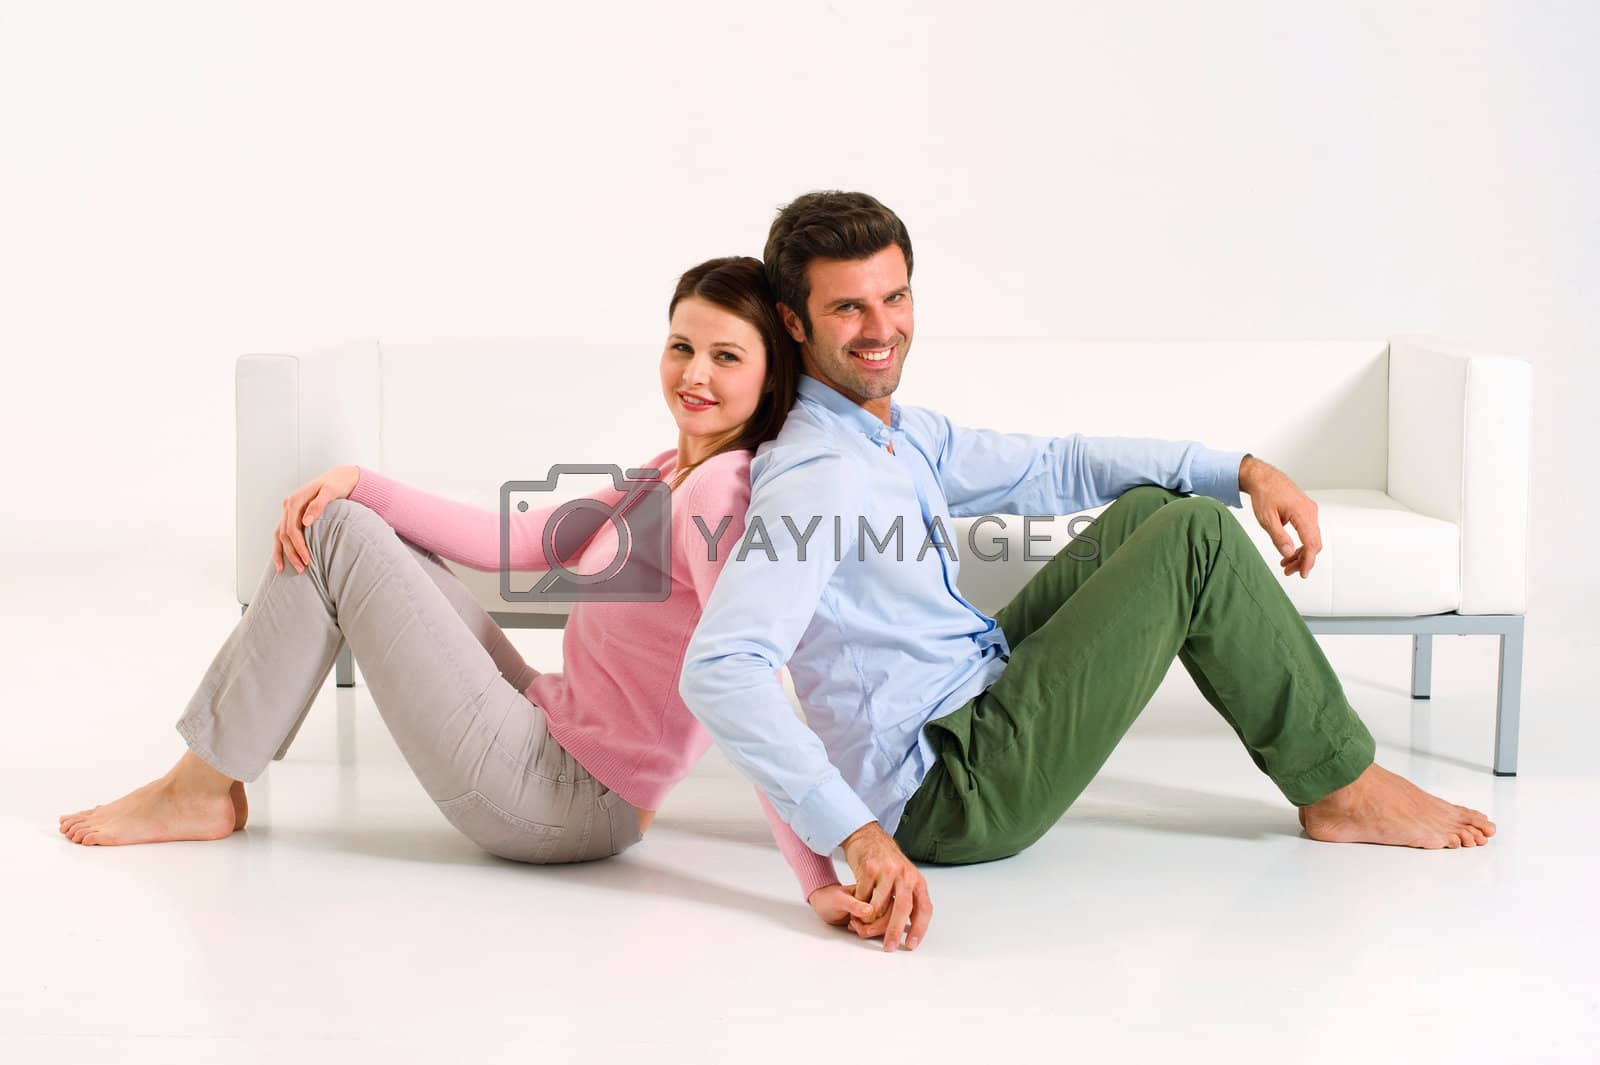 Royalty free image of couple back to back by ambro